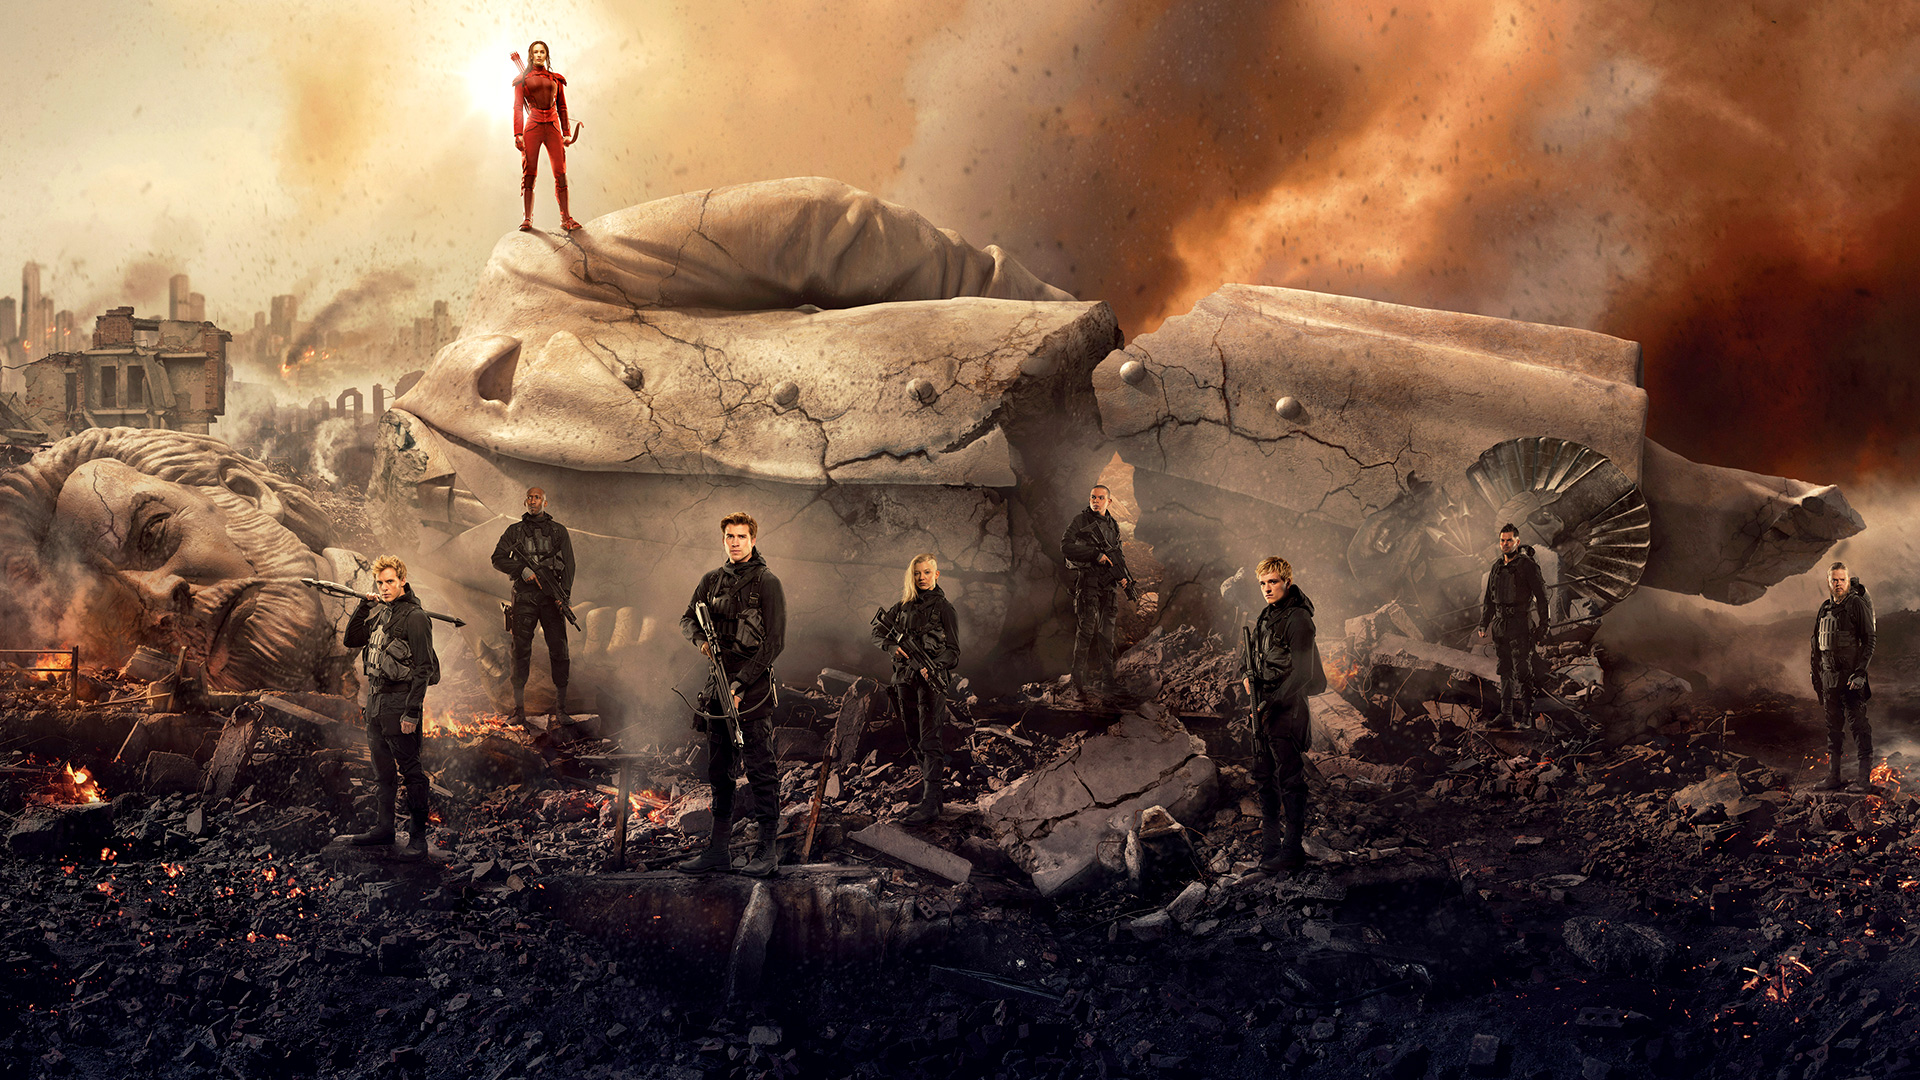 Movie The Hunger Games Mockingjay Part 2 1920x1080